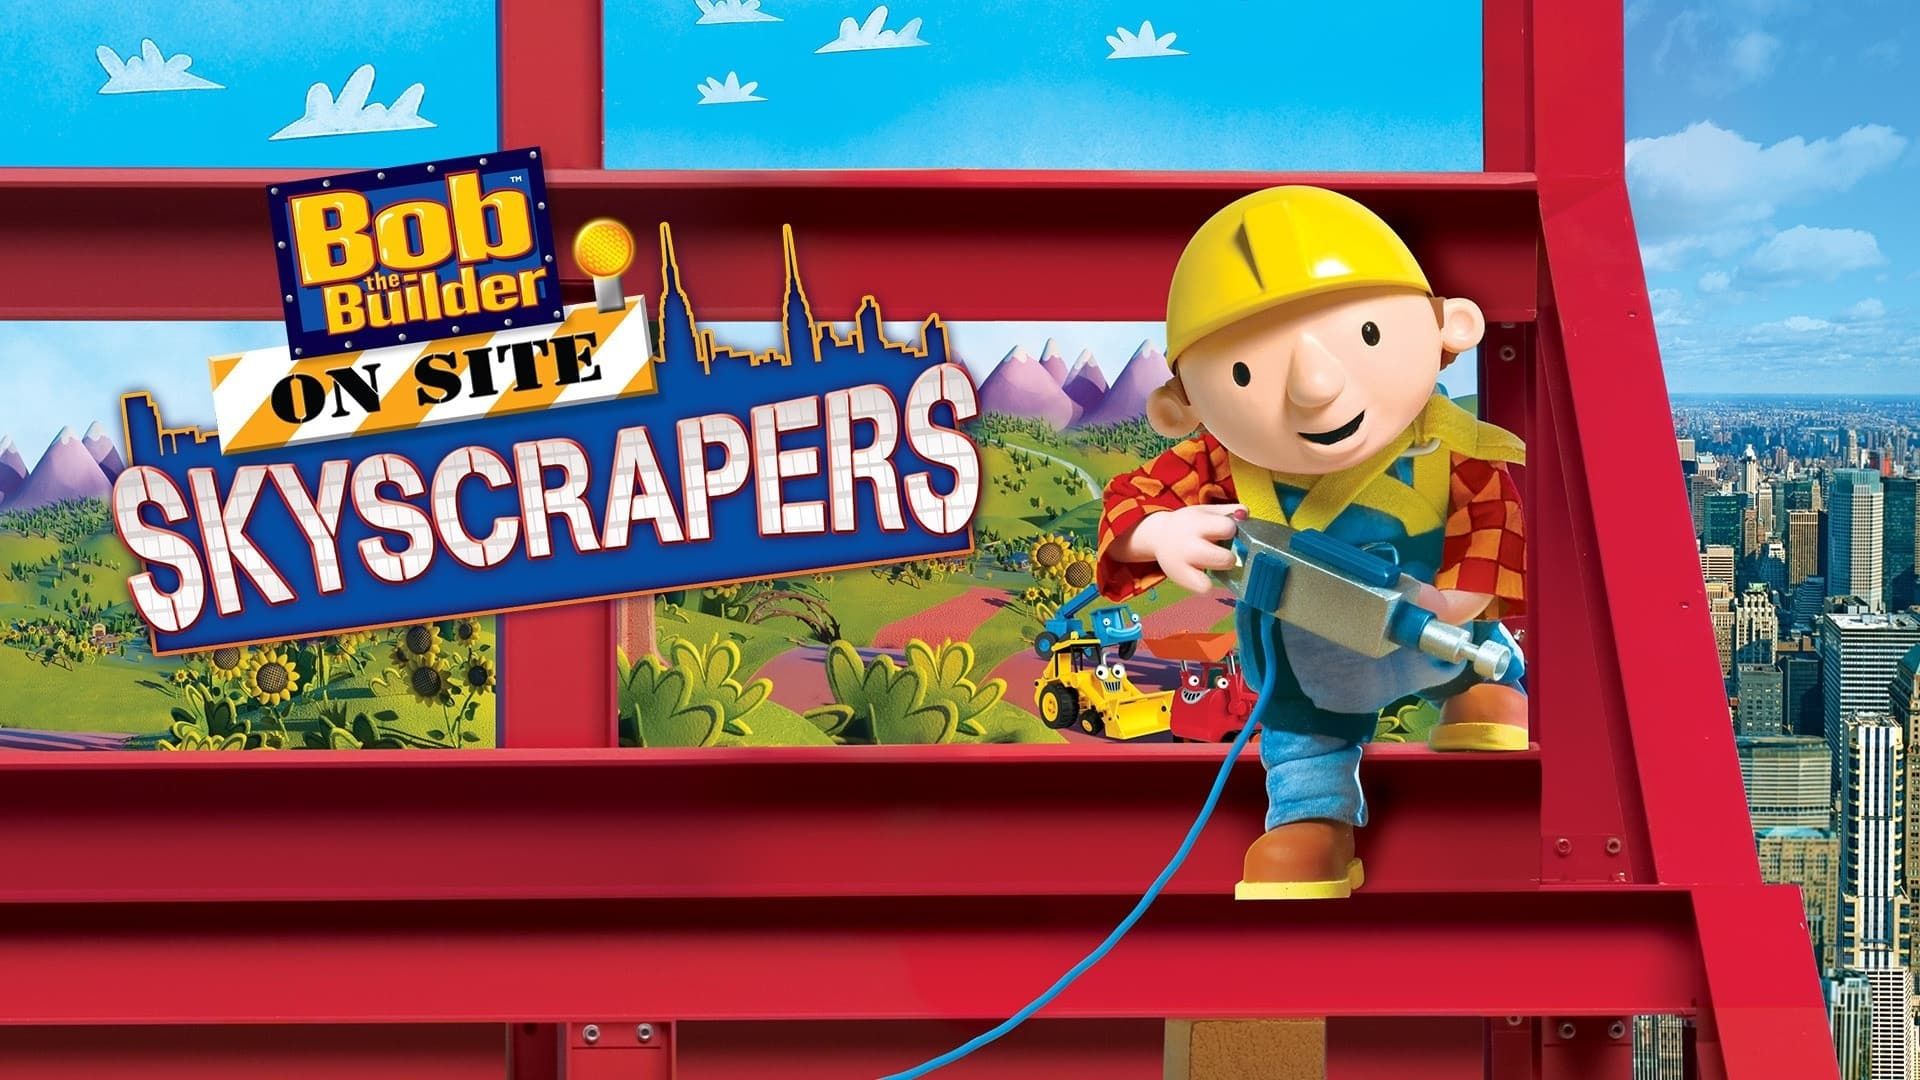 Bob the Builder on Site Skyscrapers background